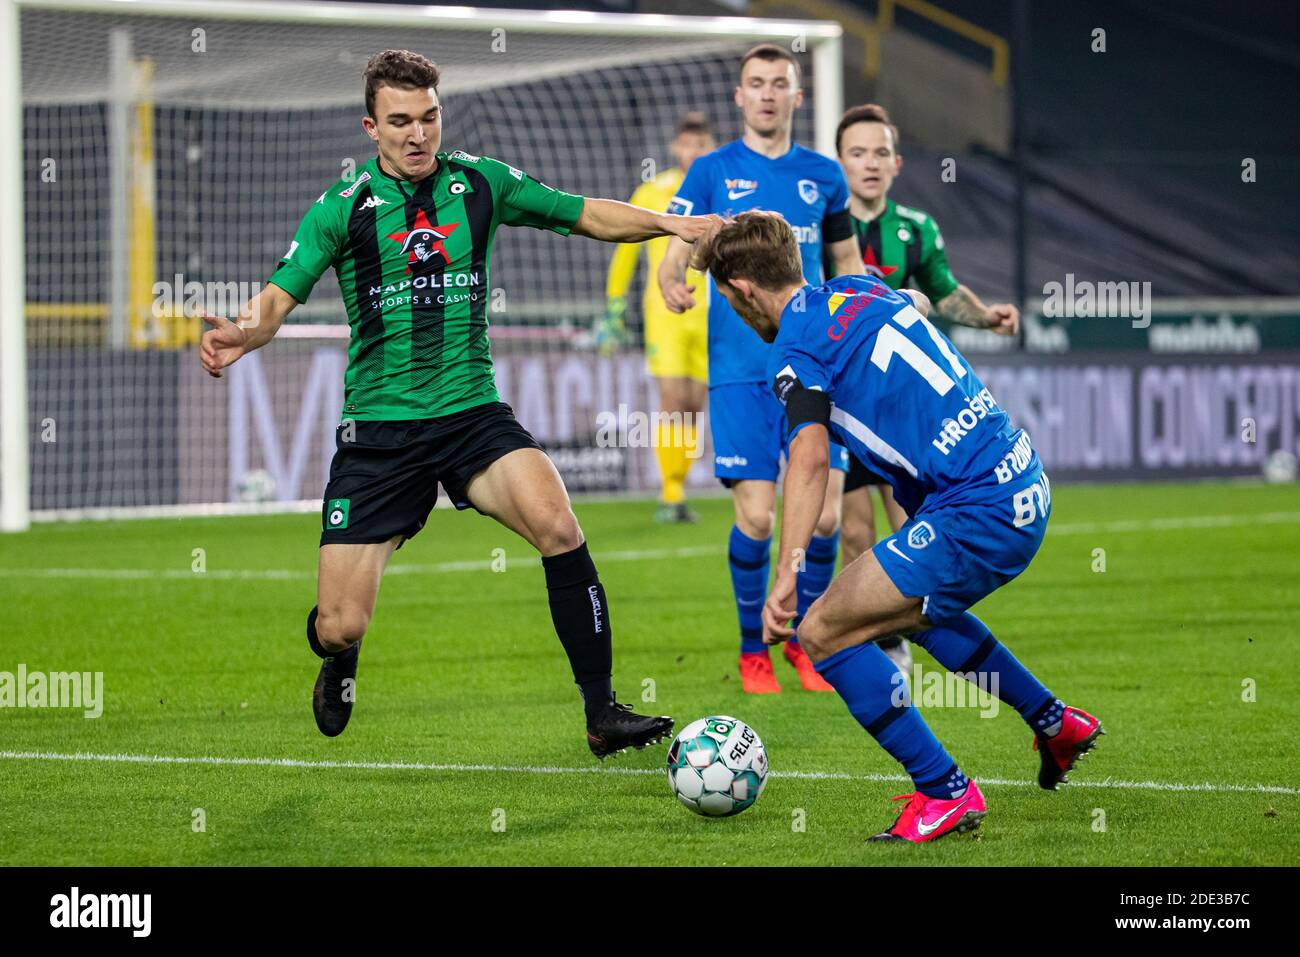 Cercle's Robbe Decostere and Genk's Patrik Hrosovsky fight for the ball during a postponed soccer match between Cercle Brugge KSV and KRC Genk, Saturd Stock Photo